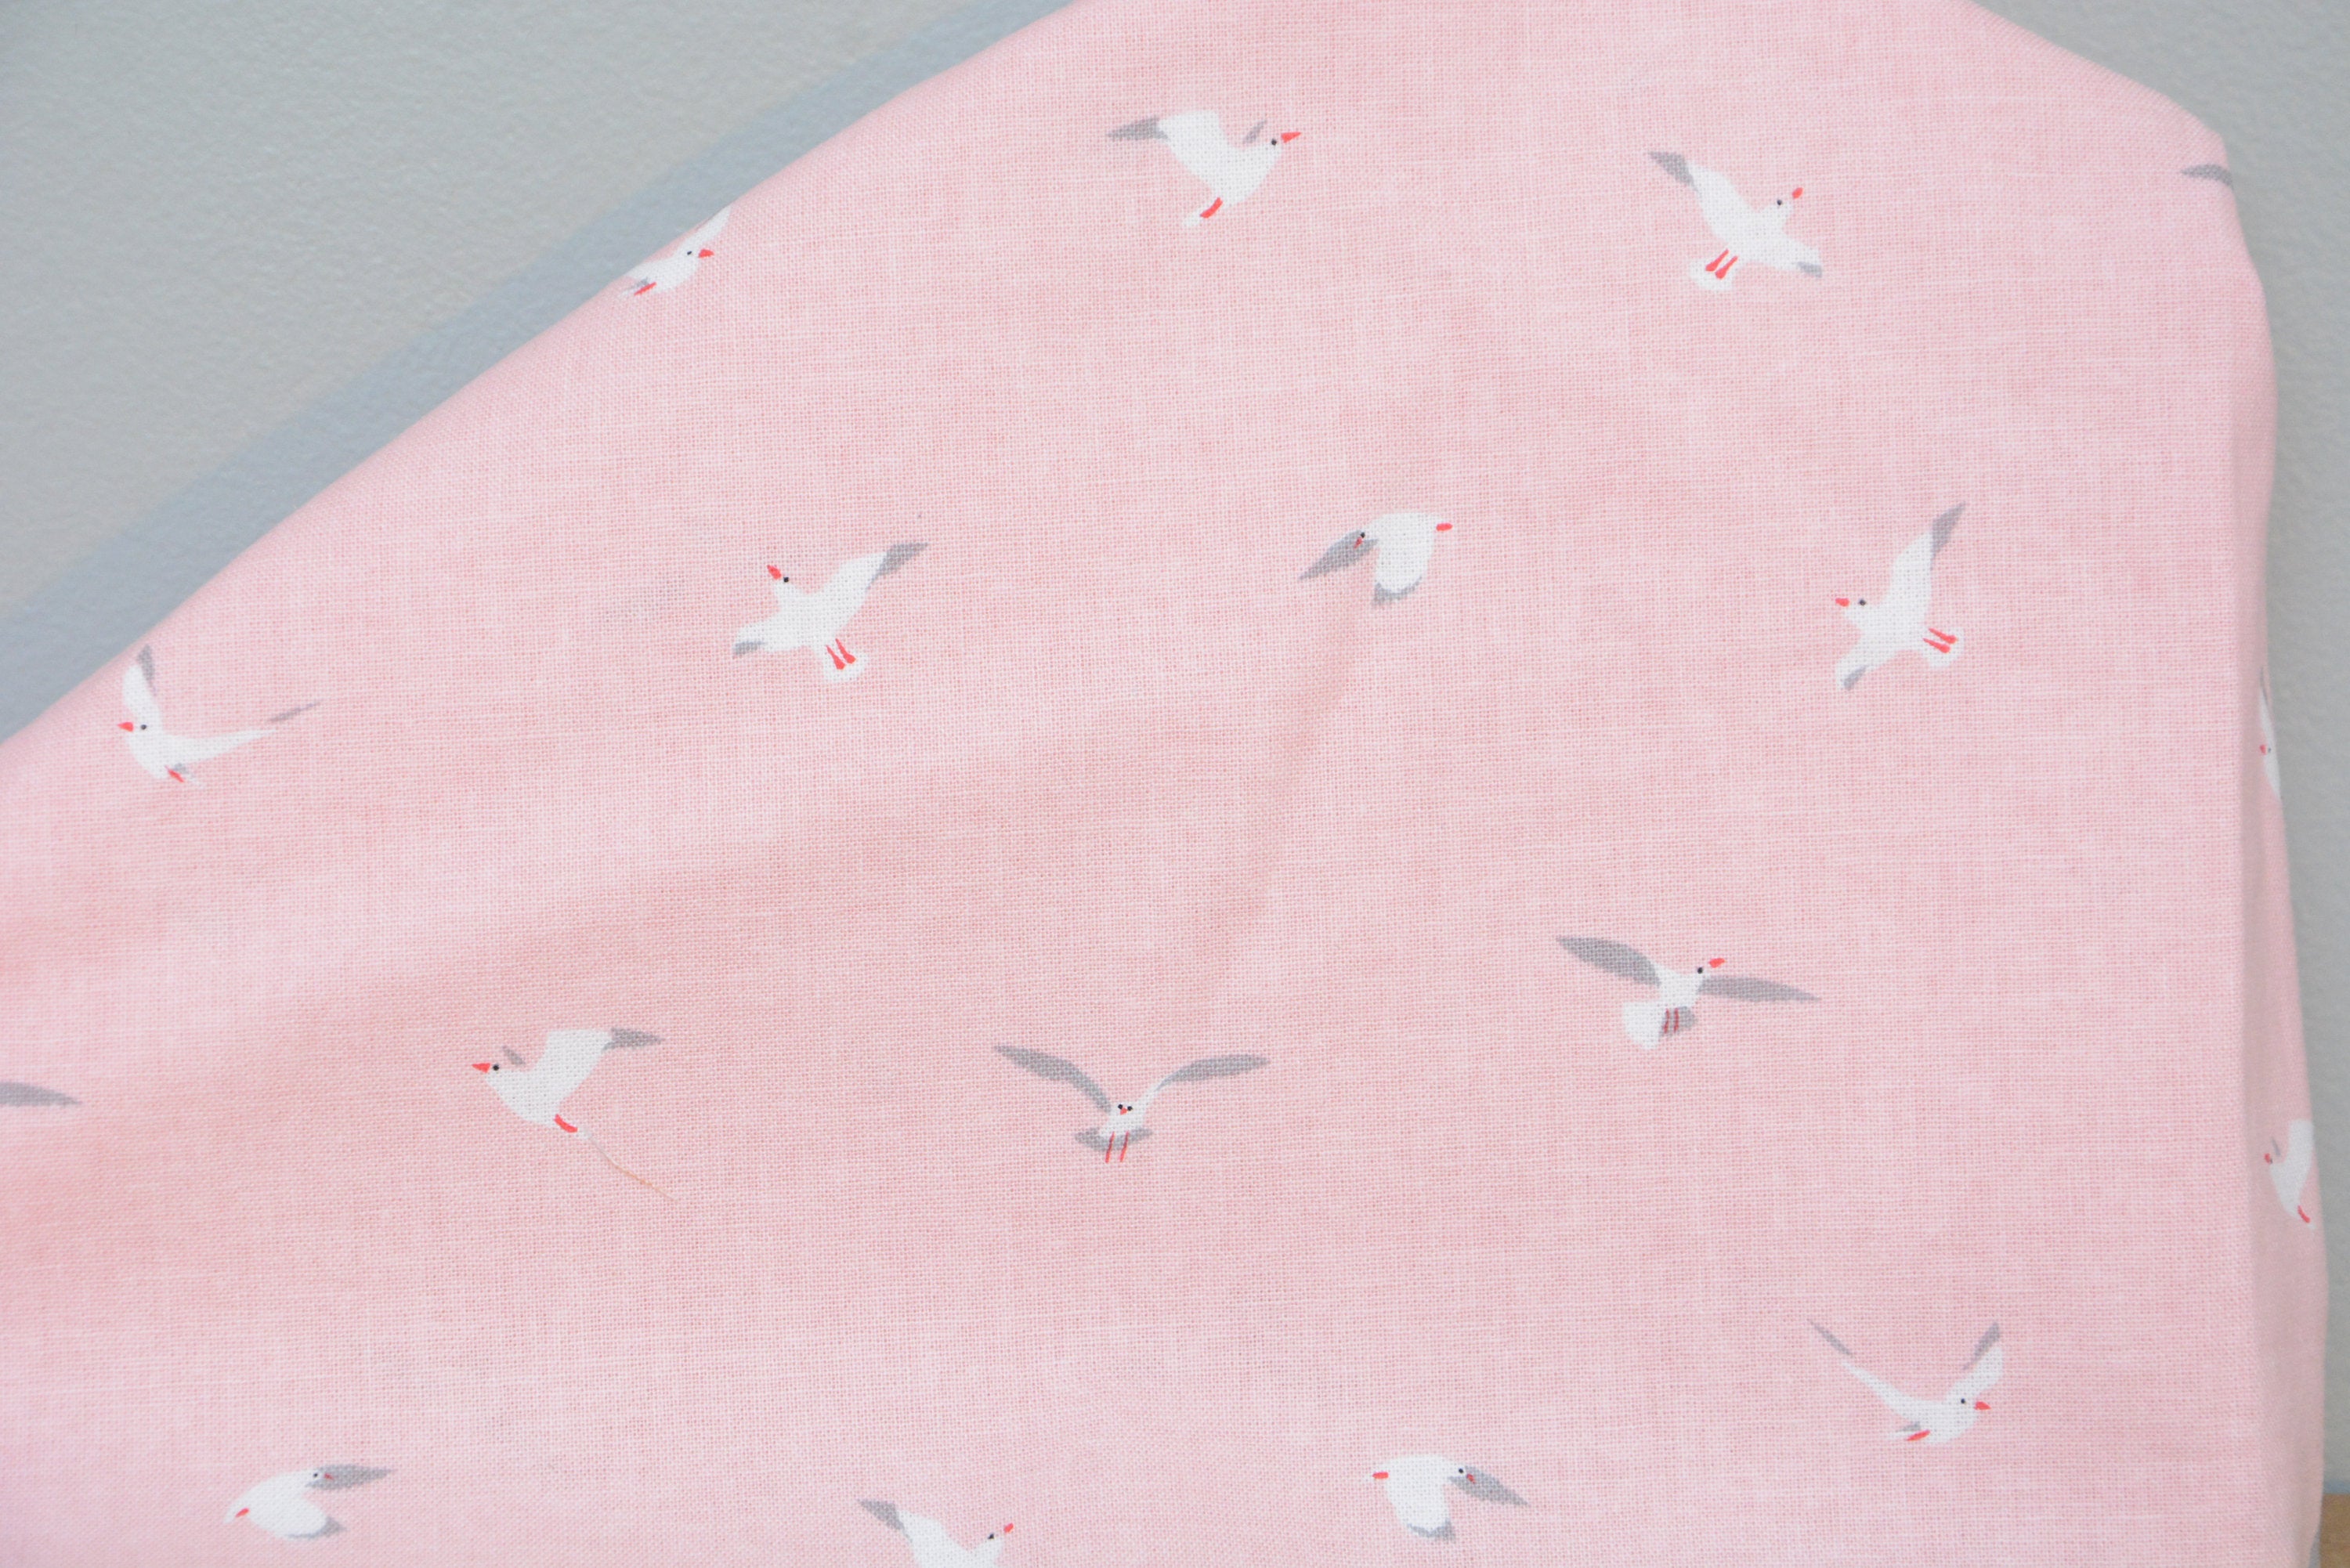 Flying Seagulls on Pink